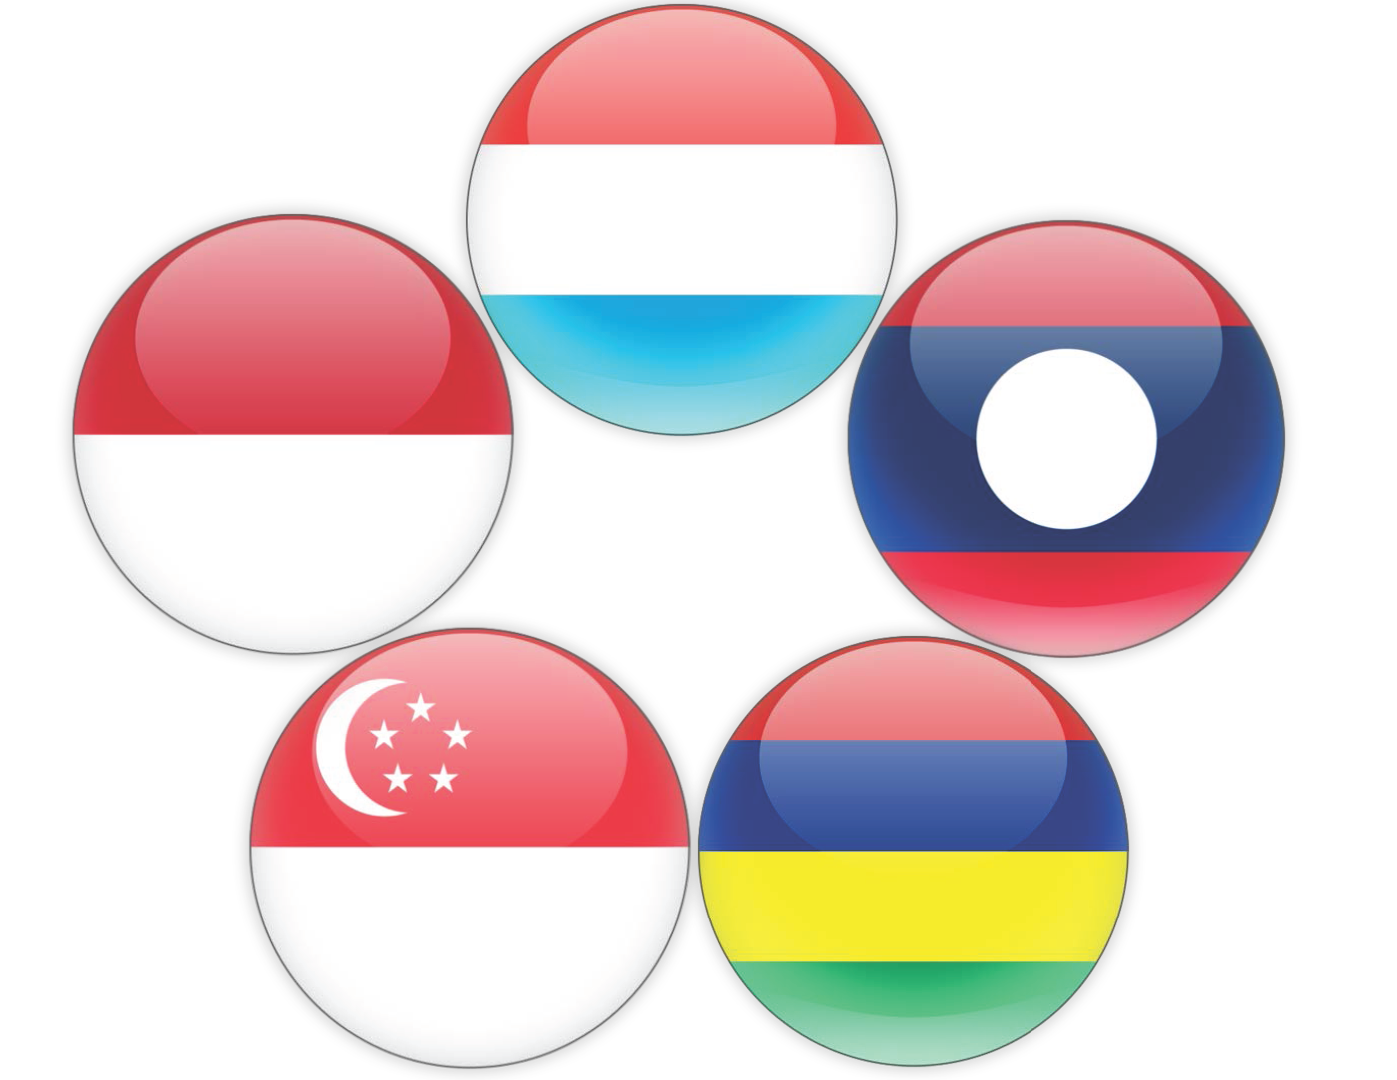 Ratification of the Convention by Lao, Luxembourg, Mauritius, Indonesia and Singapore